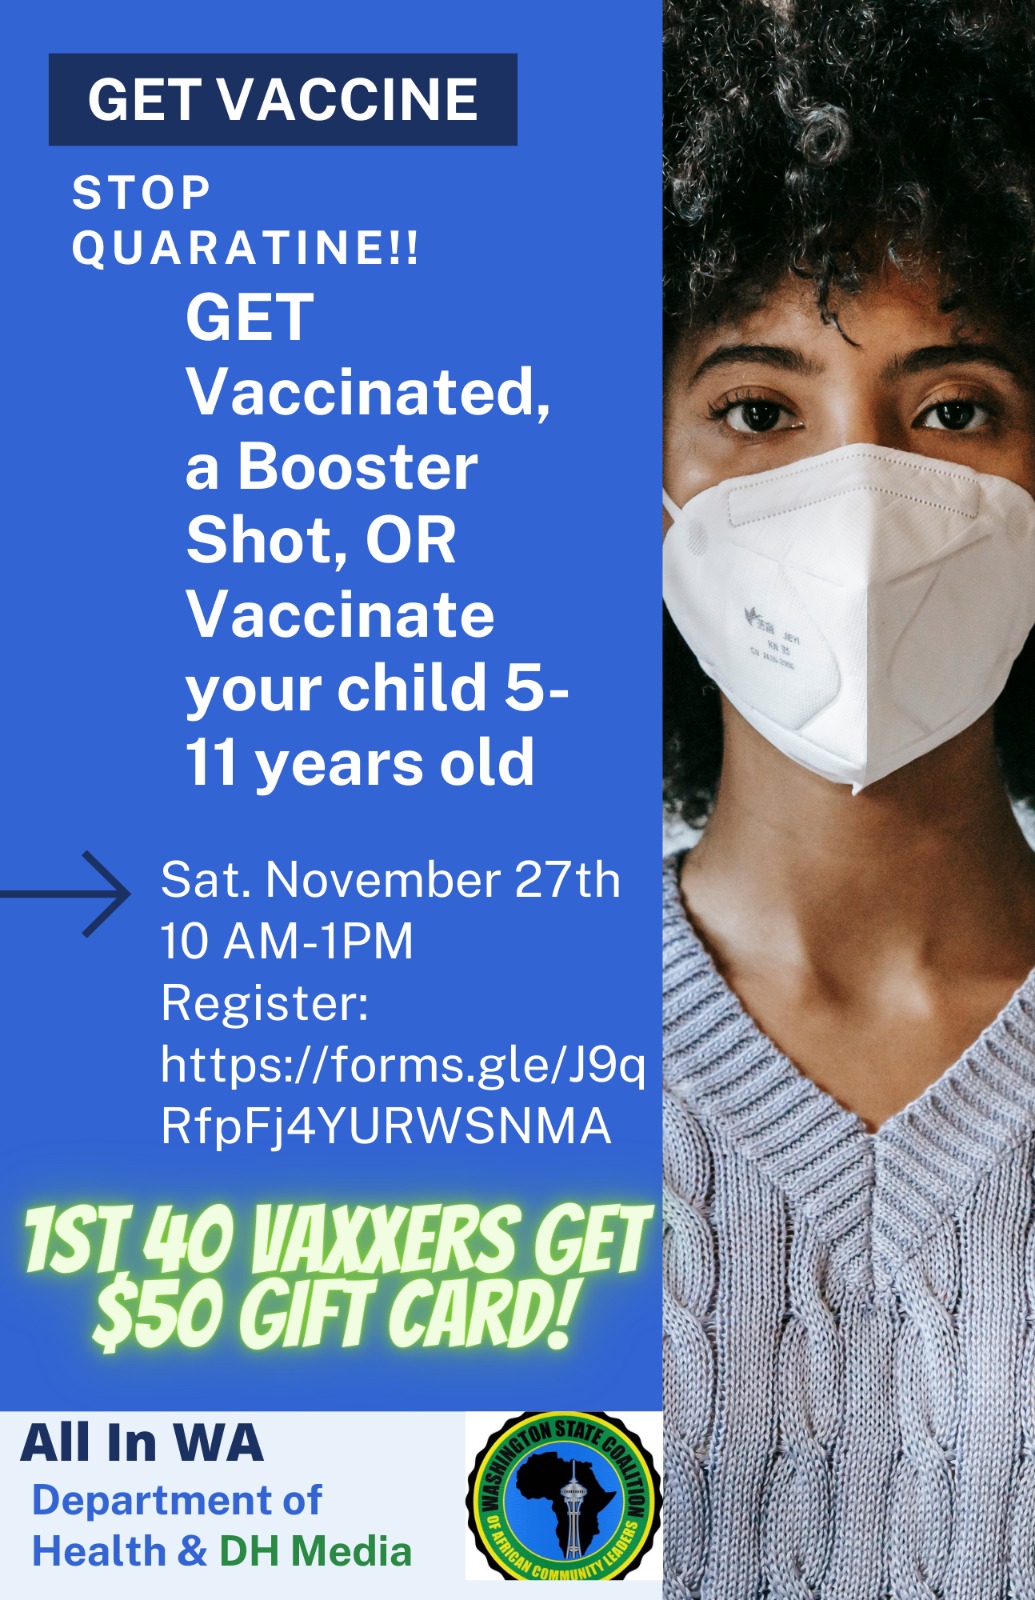 STOP QUARANTINE!! GET Vaccinated, a Booster Shot, OR Vaccinate your child 5-11 years old